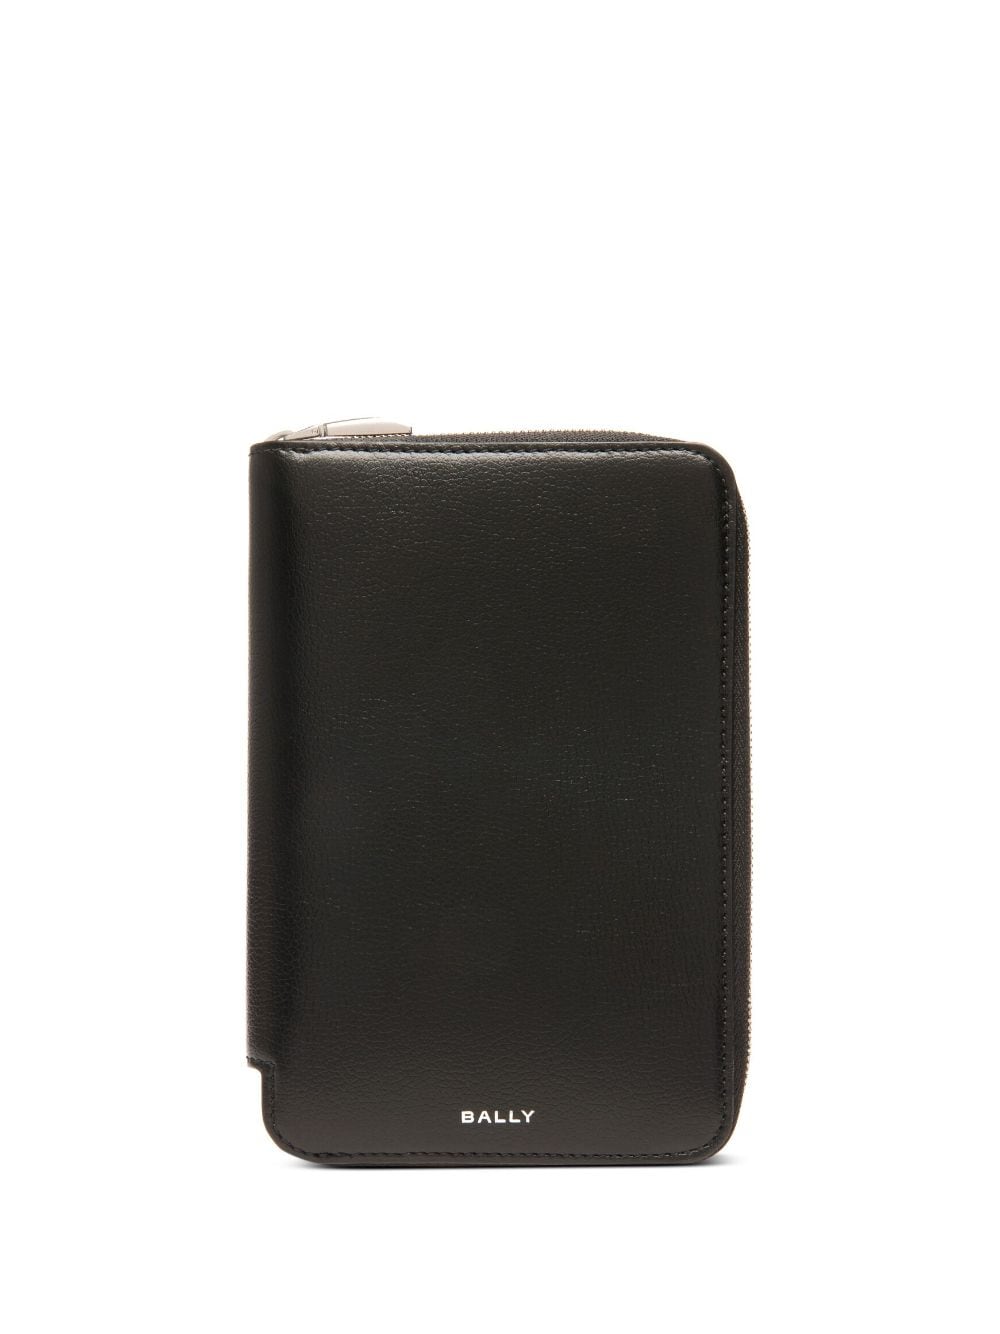 Bally Banque Leather Travel Wallet In Black